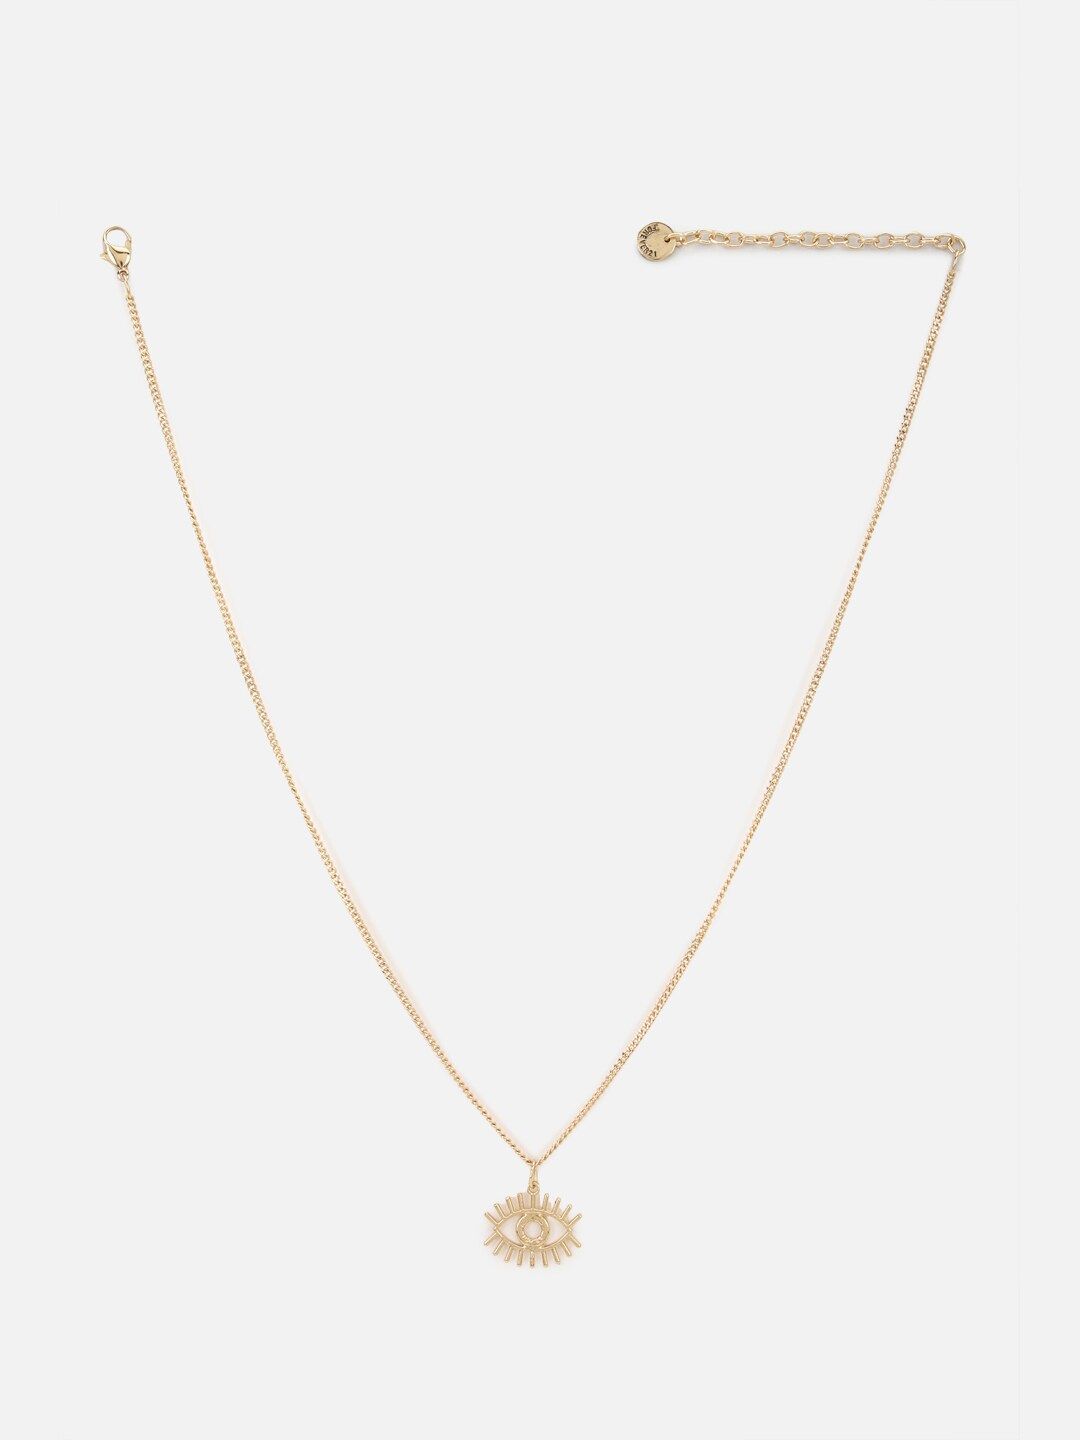 FOREVER 21 Gold-Toned Solid Minimal Necklace Price in India